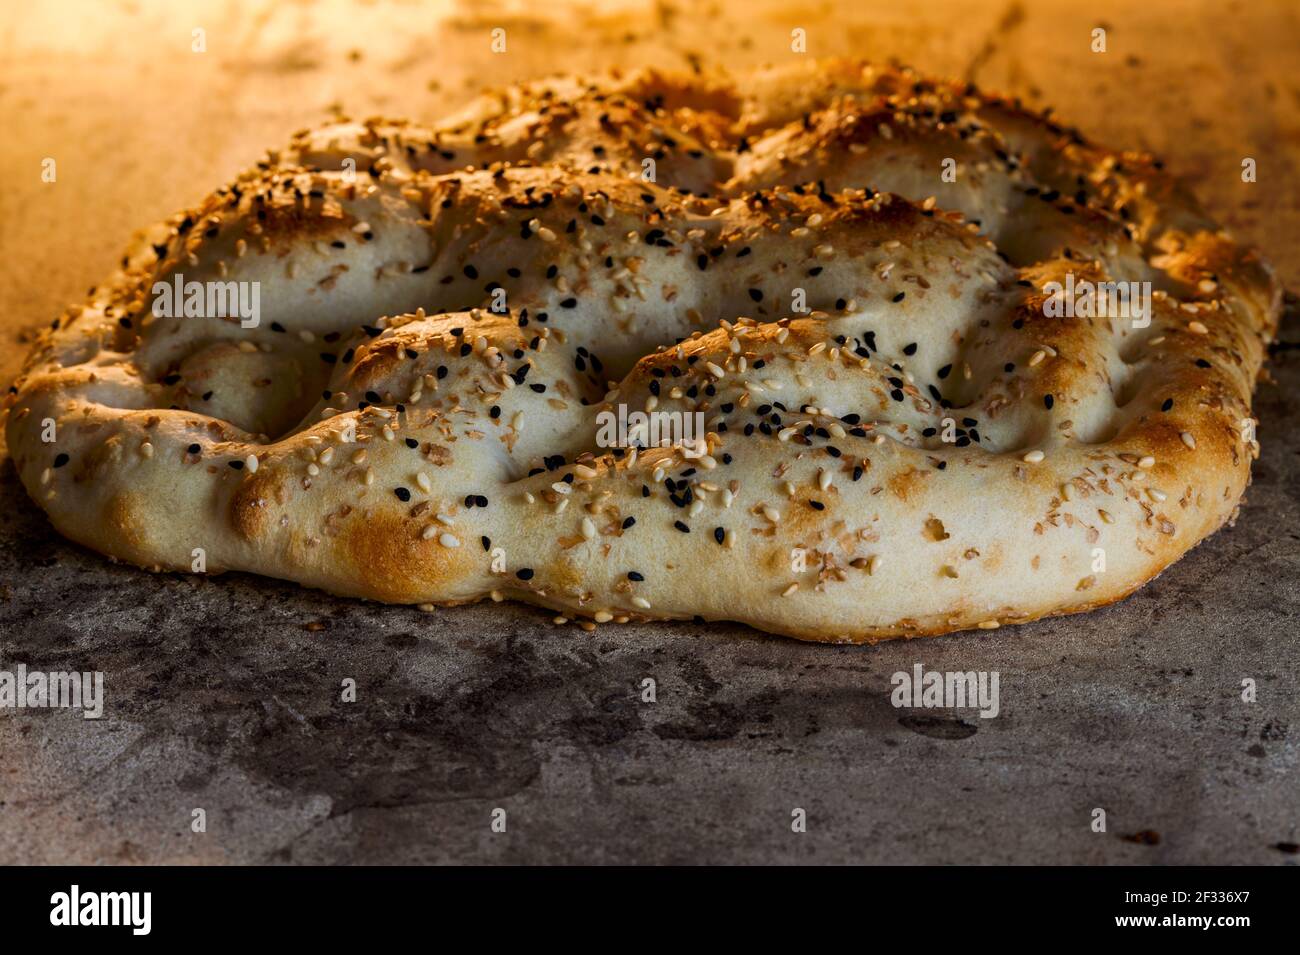 Ramazan pidesi is a type of Turkish flat bread (called pide) that is baked in wood fired stone ovens during the month of ramadan. A  bread is baking i Stock Photo